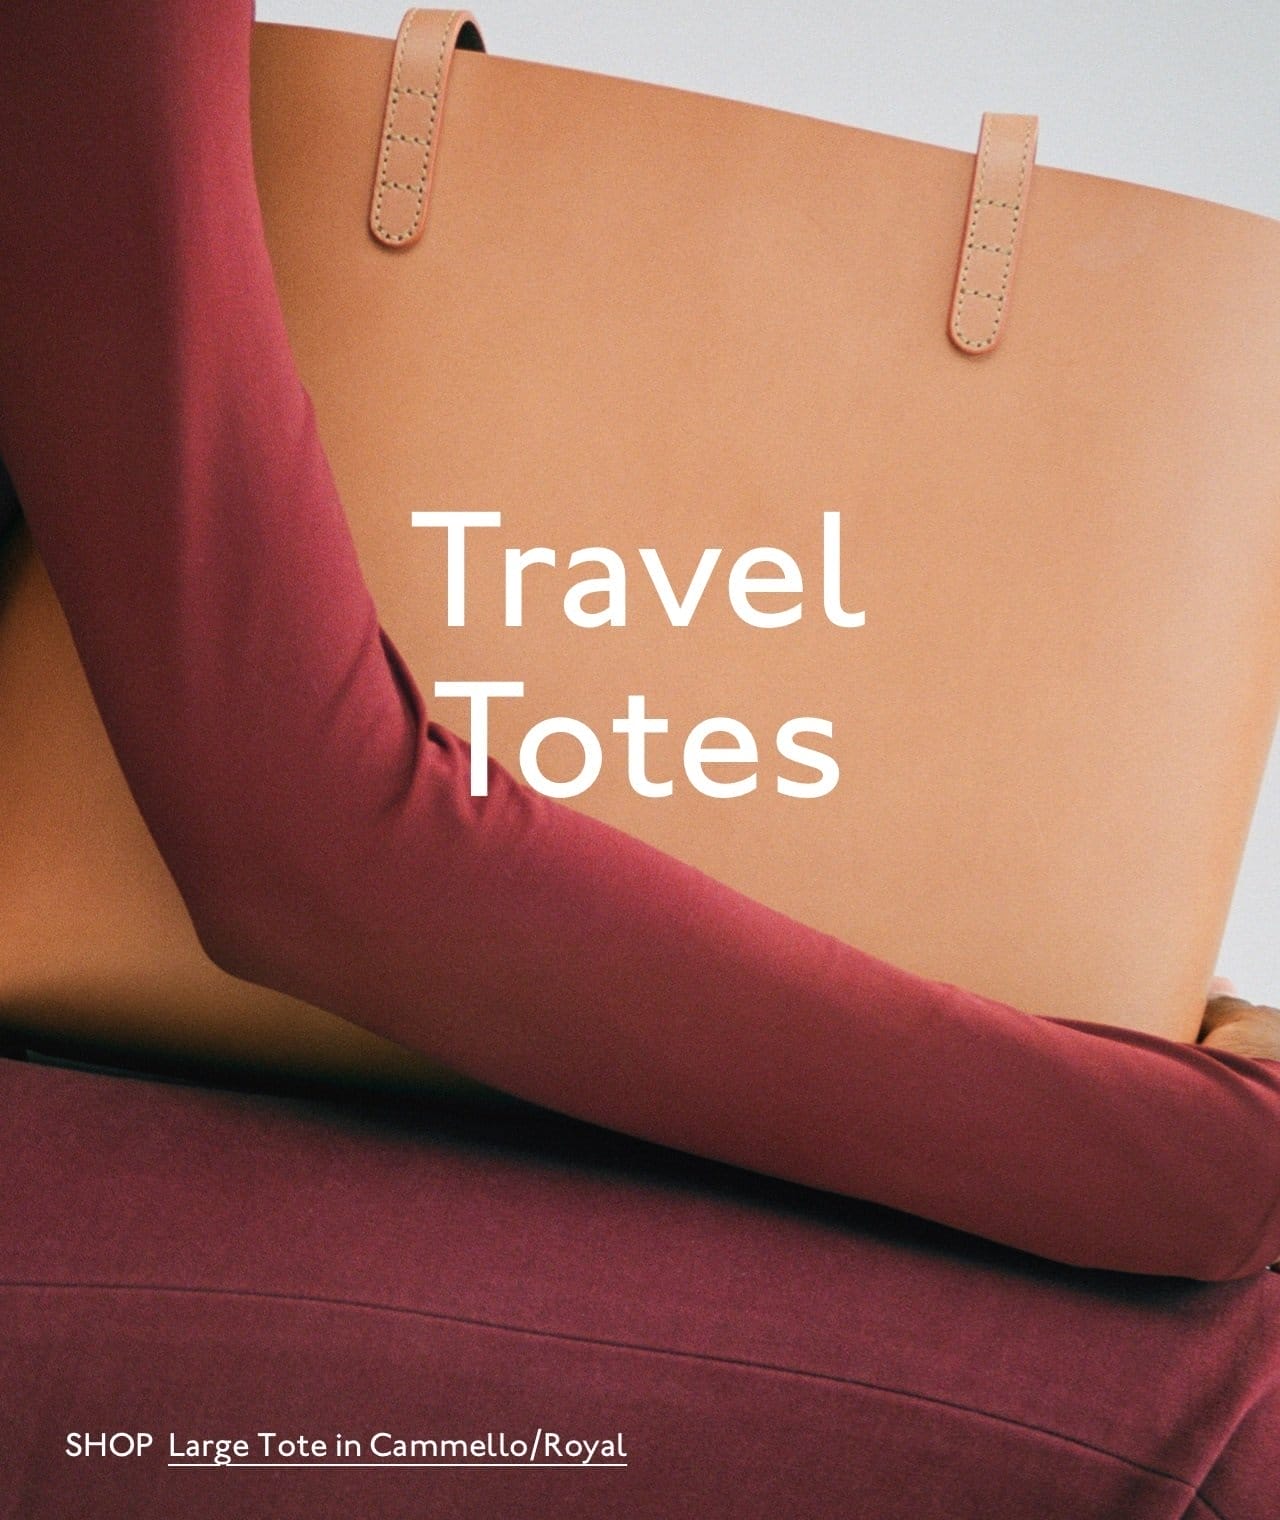 Shop travel totes. Pictured: Large Tote in Cammello/Royal.